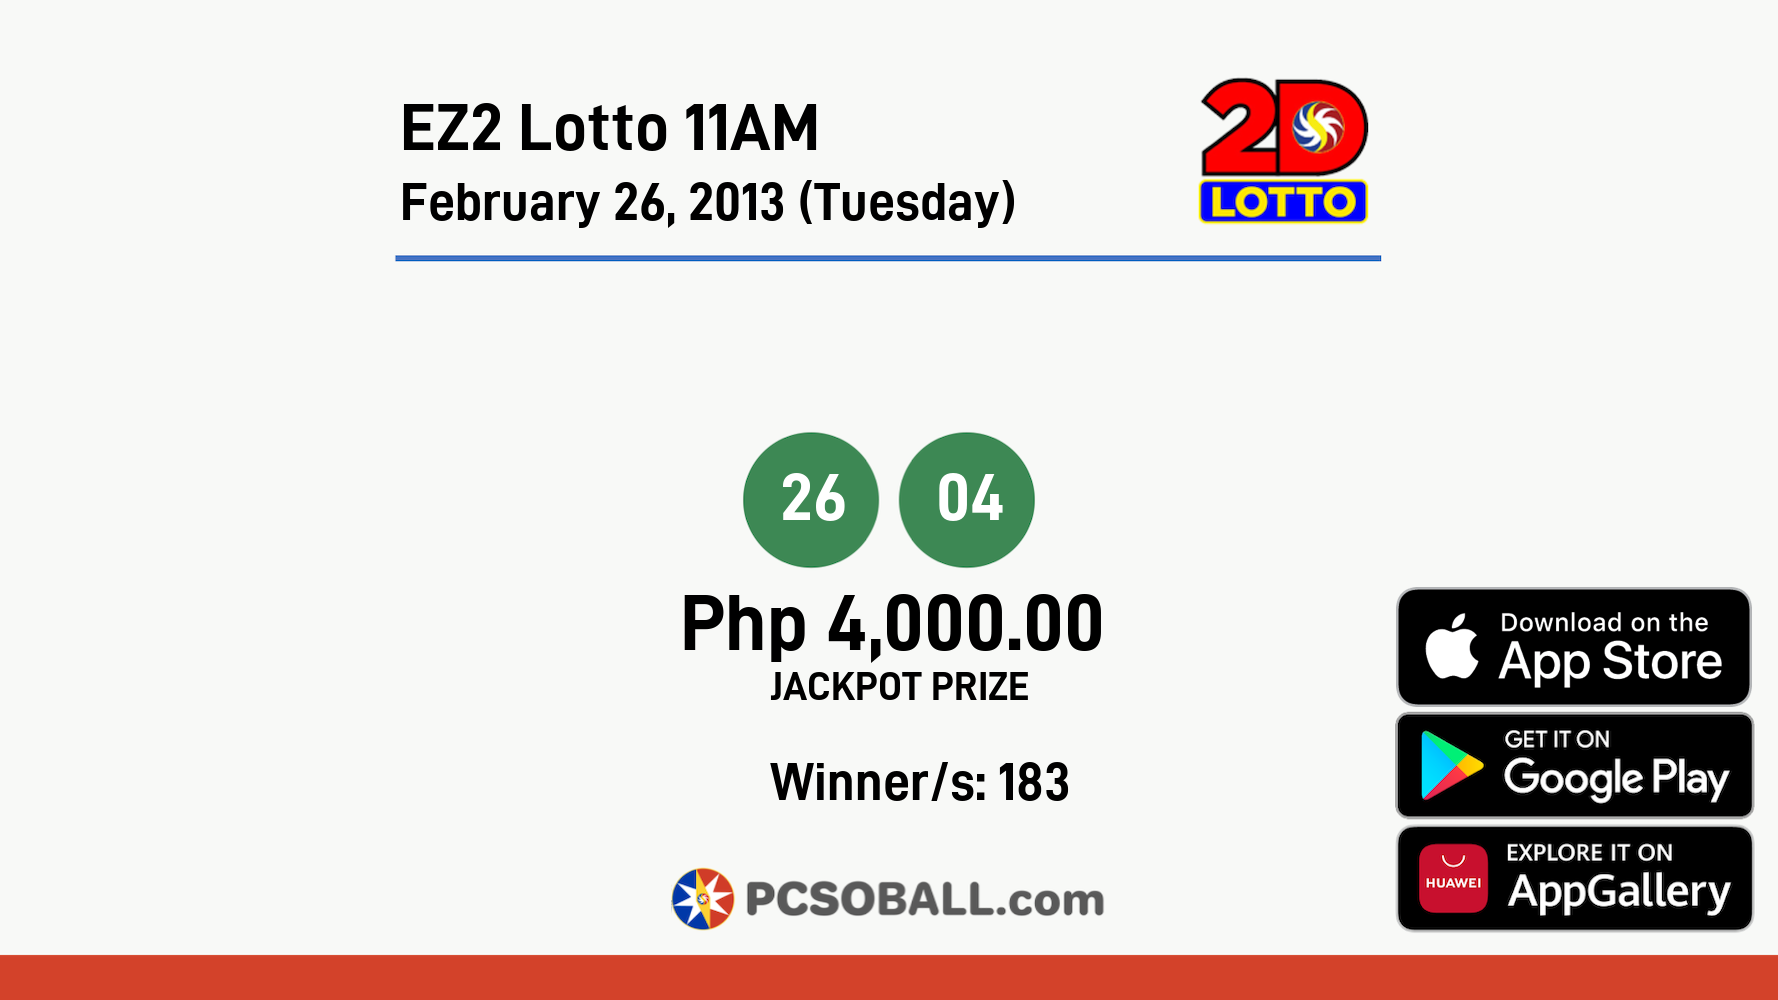 EZ2 Lotto 11AM February 26, 2013 (Tuesday) Result